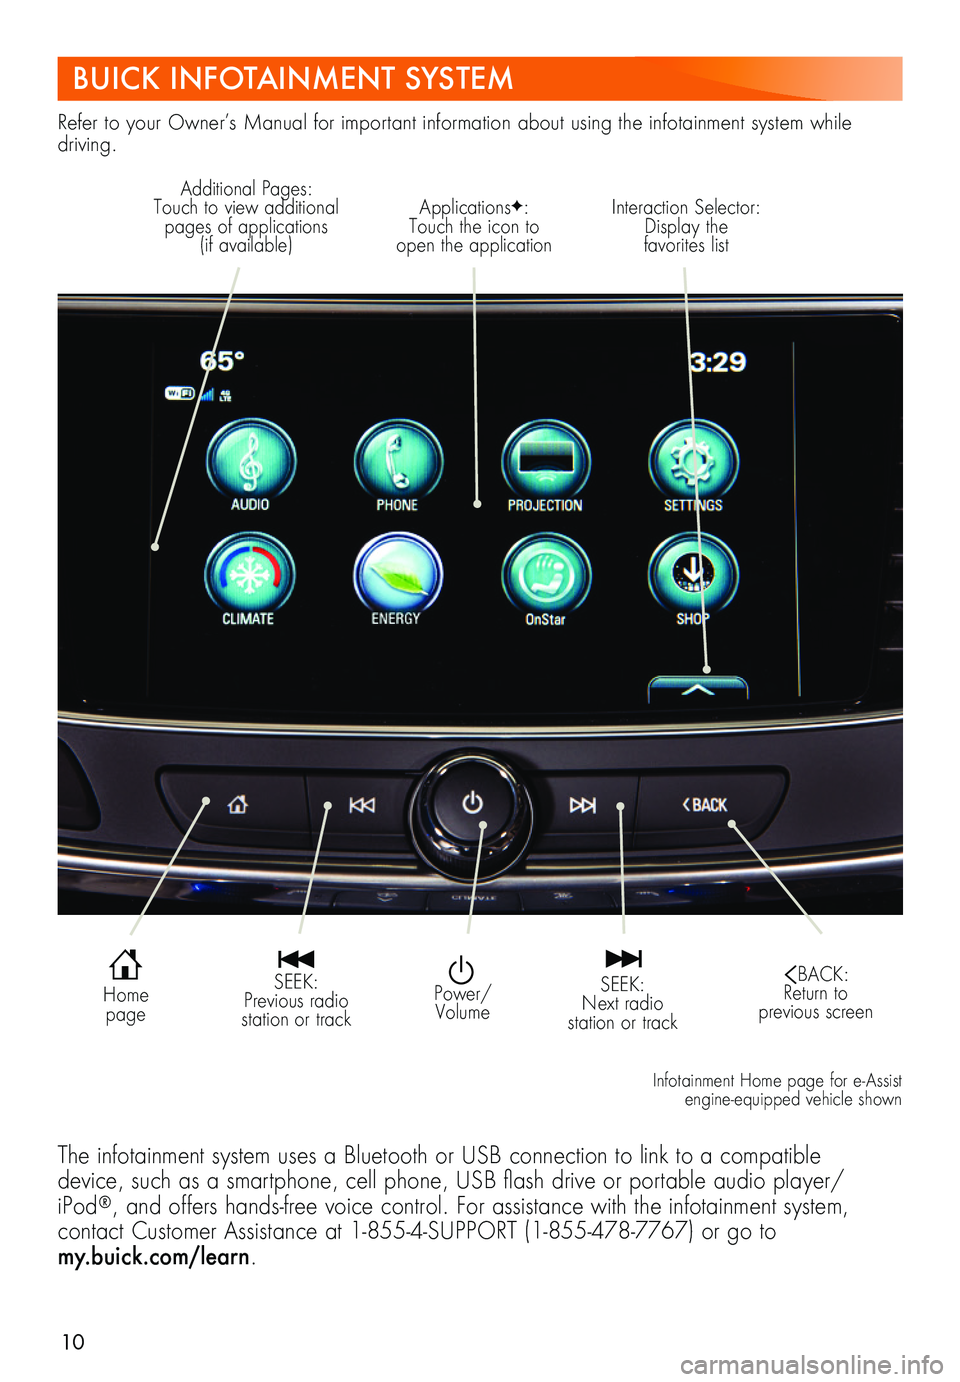 BUICK LACROSSE 2018  Get To Know Guide 10
BUICK INFOTAINMENT SYSTEM
Refer to your Owner’s Manual for important information about using the infotainment system while driving.
  Power/Volume
Interaction Selector: Display the  favorites lis